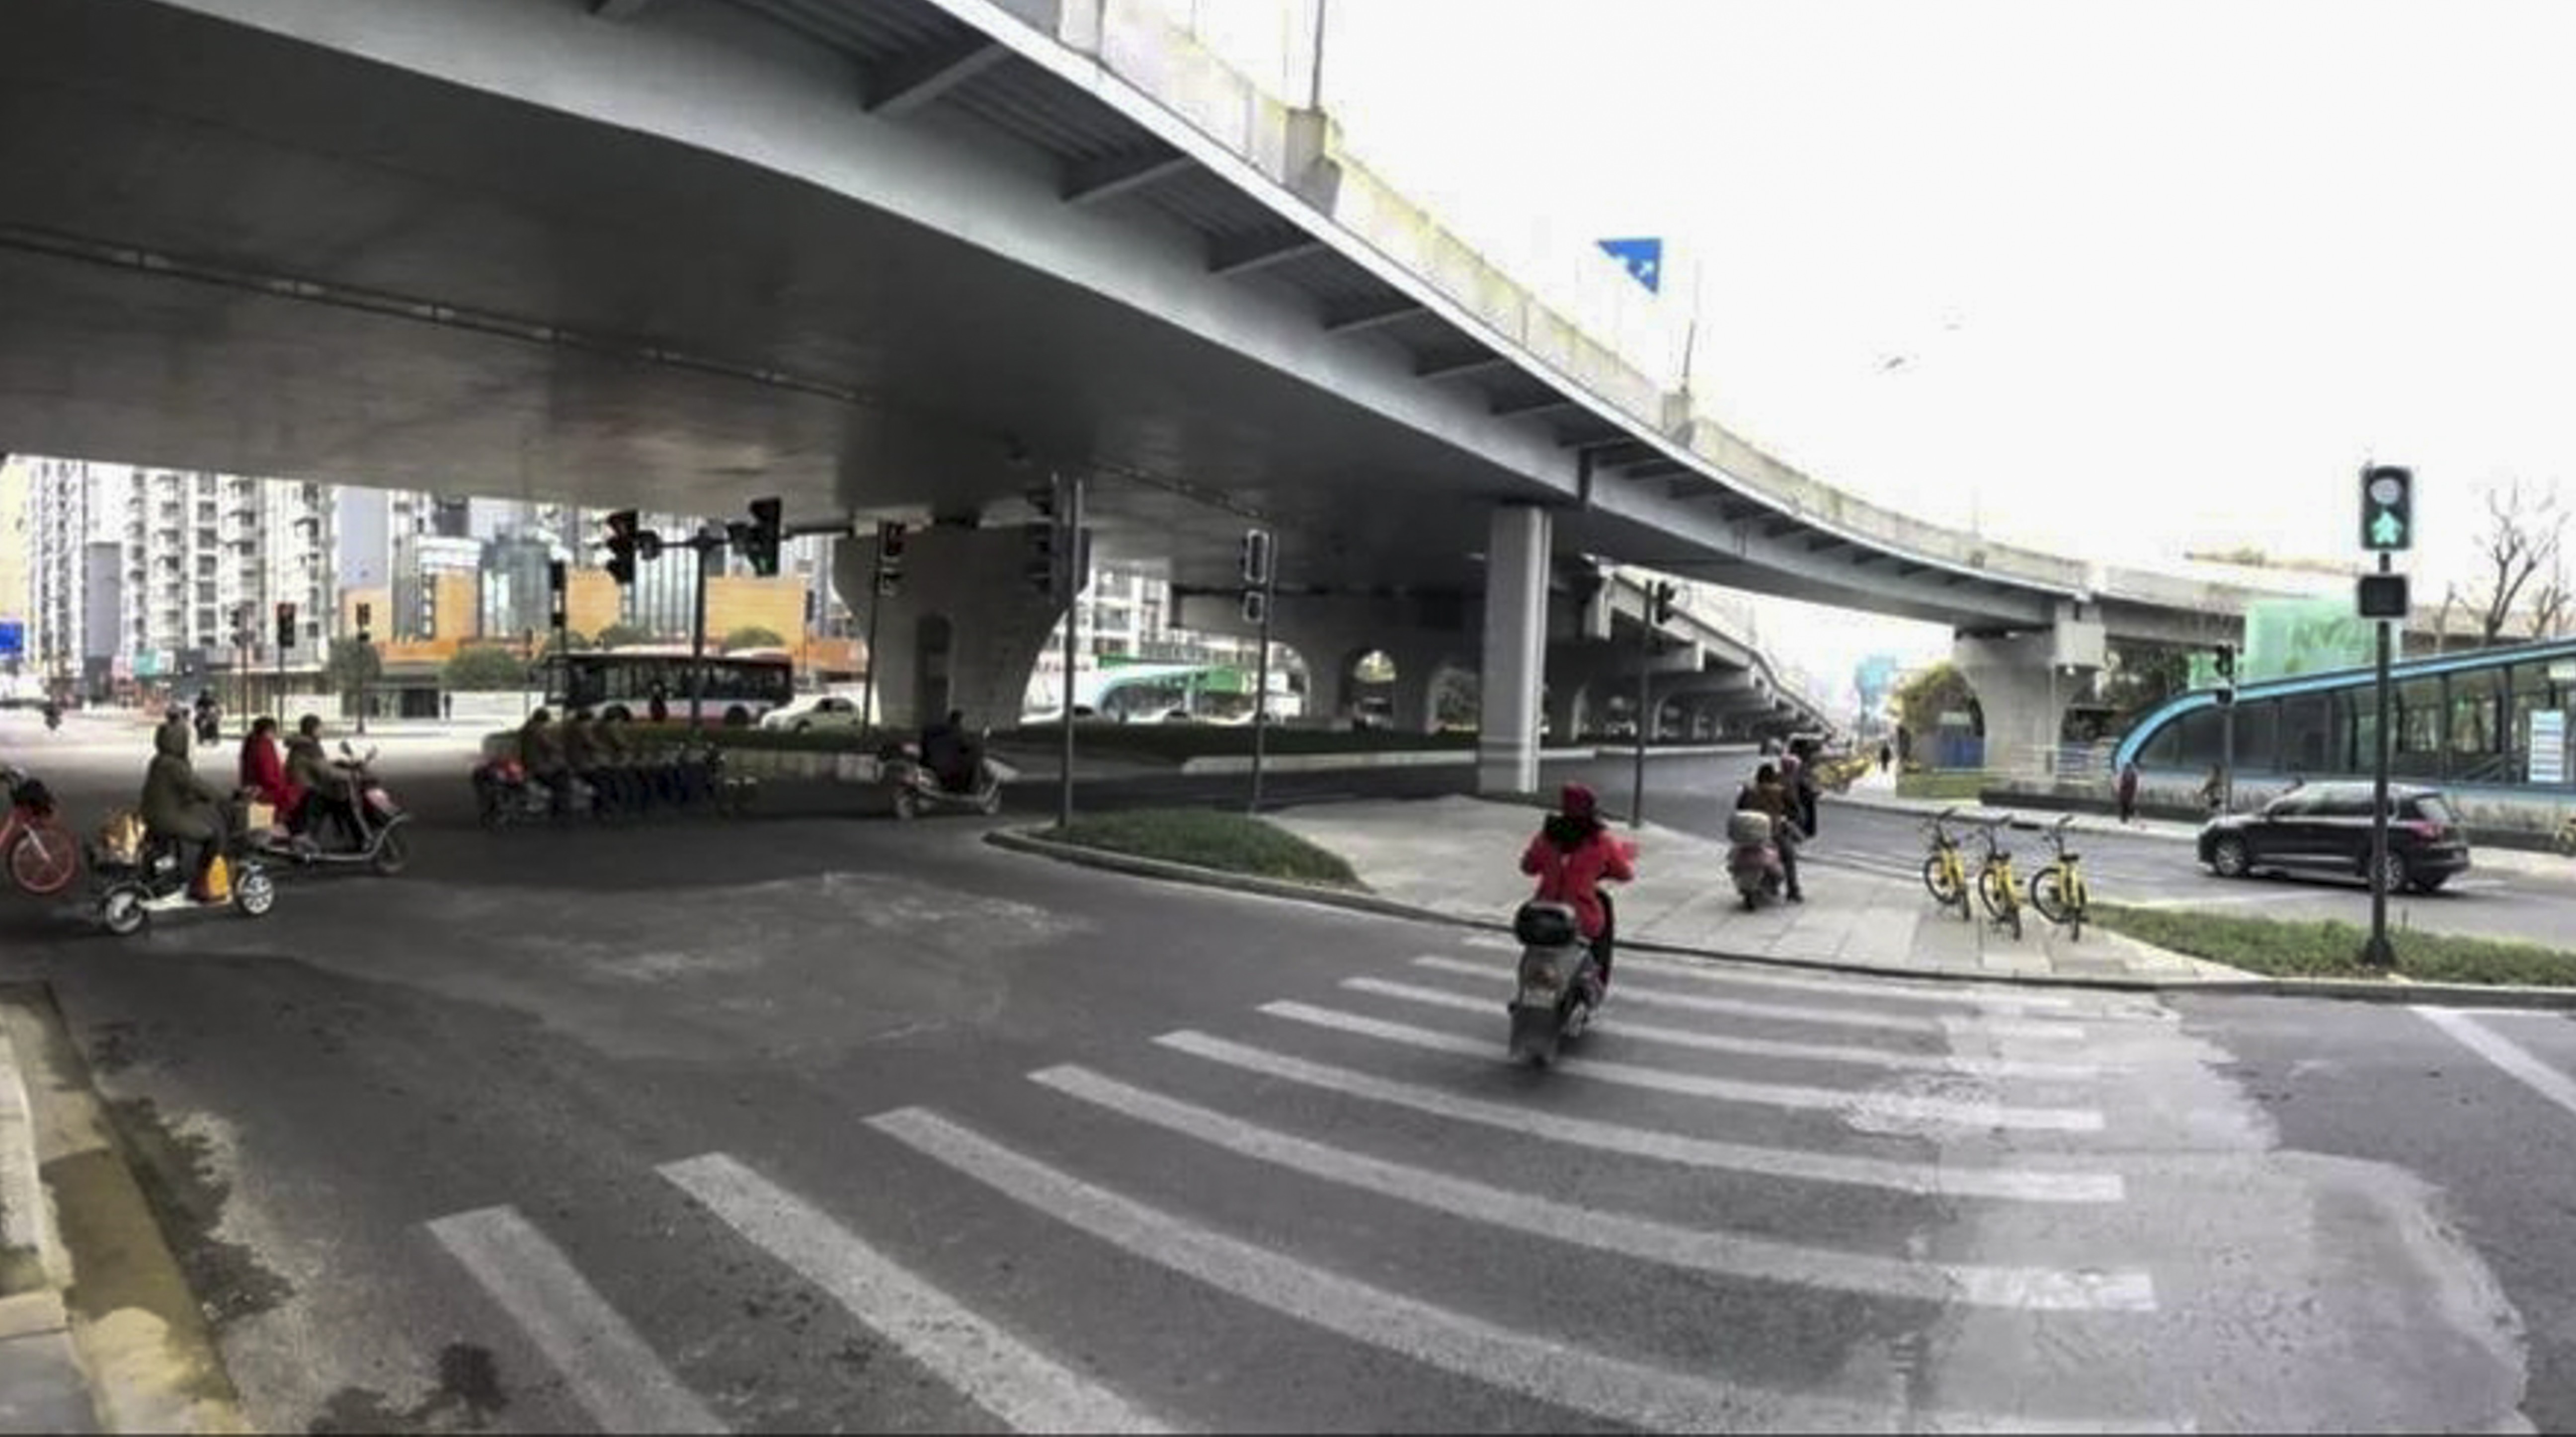 Dozens of traffic lights have been installed at an intersection in Chengdu, creating confusion for some commuters. Photo: News.sina.com.cn